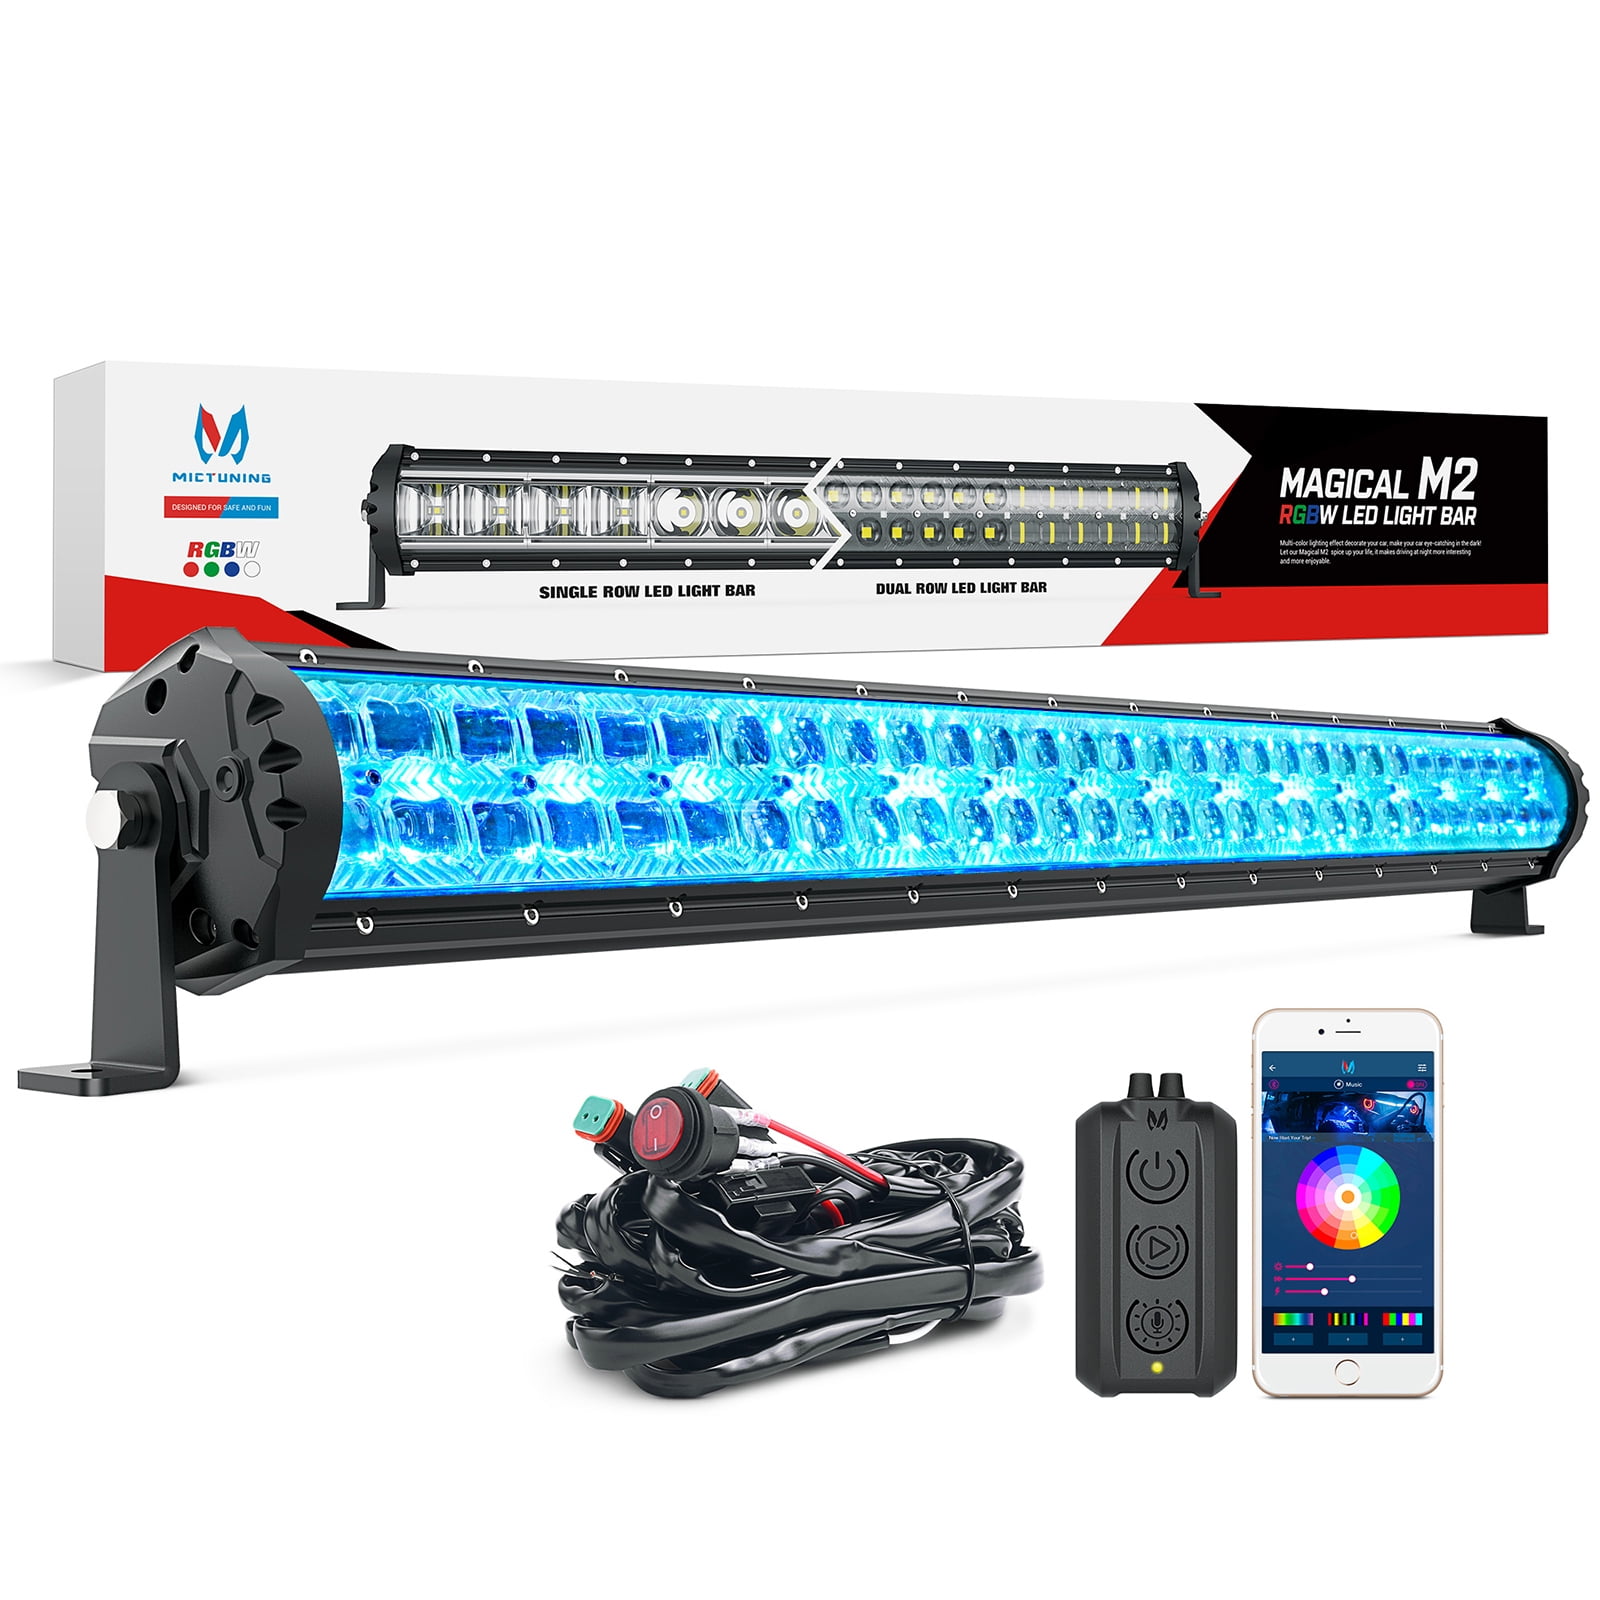 MICTUNING Magical M2 RGBW LED Light Bar - Dual Row 32 inch Off Road Driving Light Combo Work Light with App, Control Box, Wiring Harness, Side 